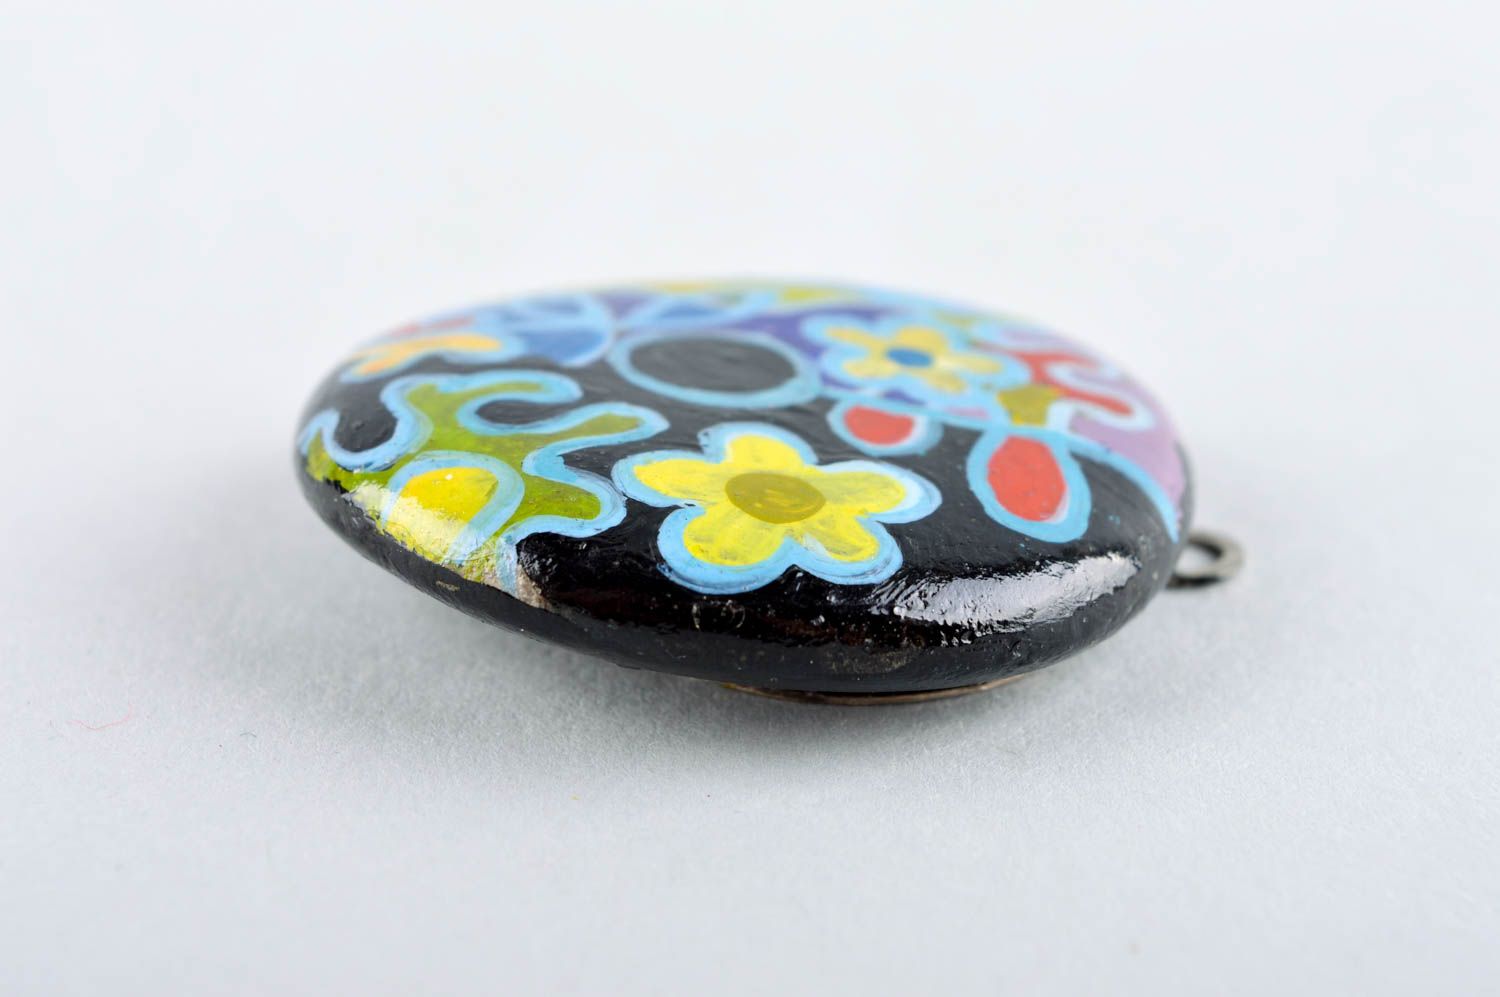 Stylish handmade round stone pendant cool jewelry designs gifts for her photo 4